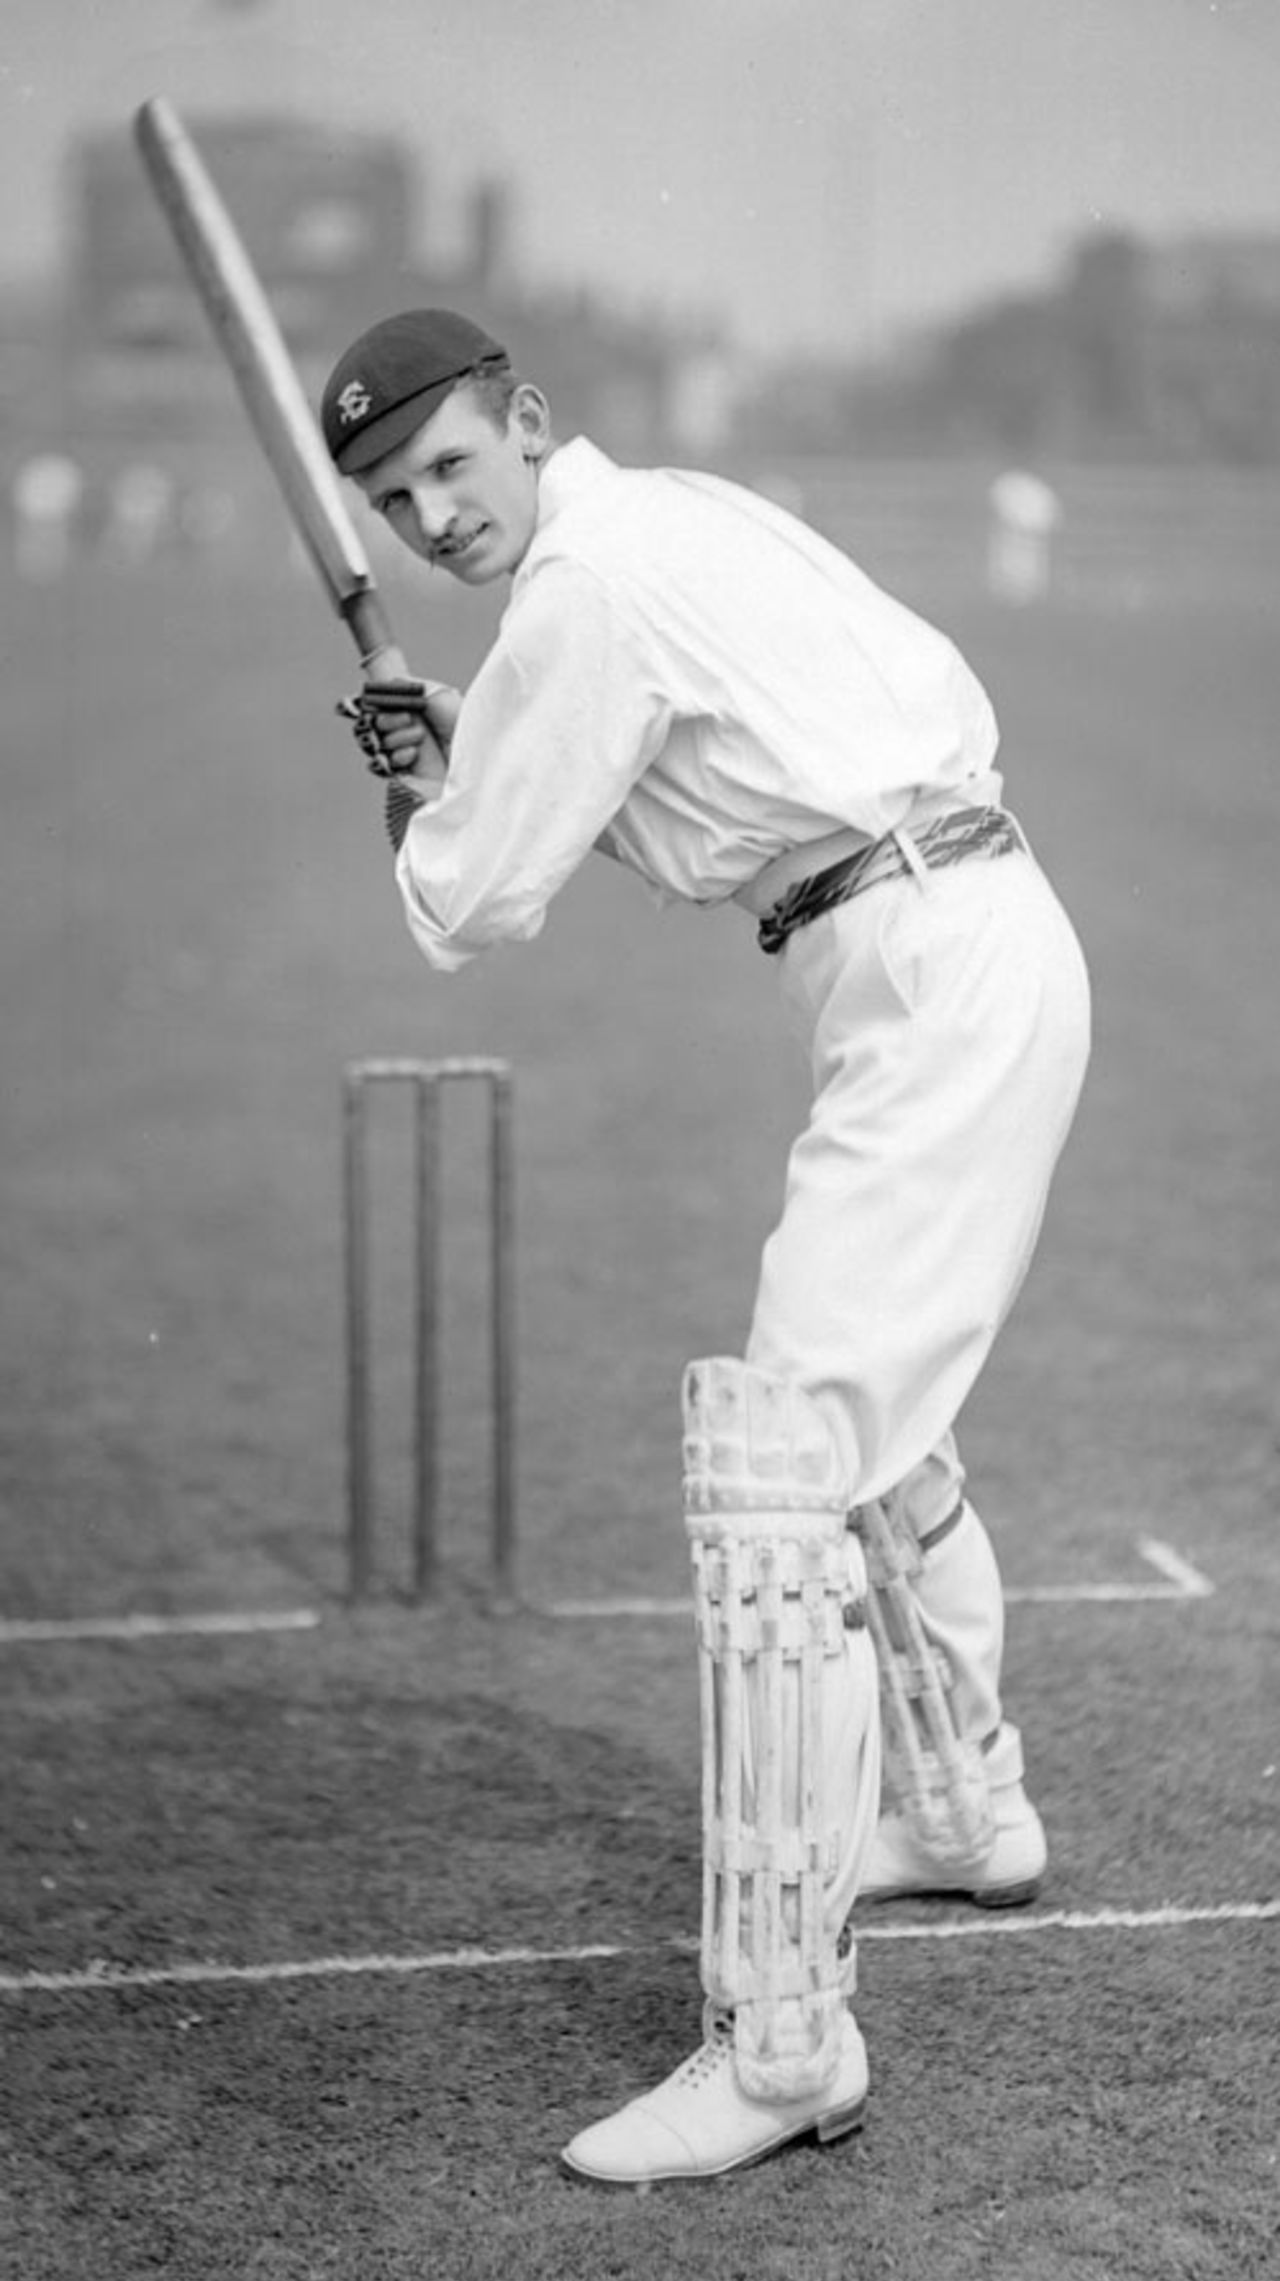 Surrey's Frederick Holland in the nets, circa 1901